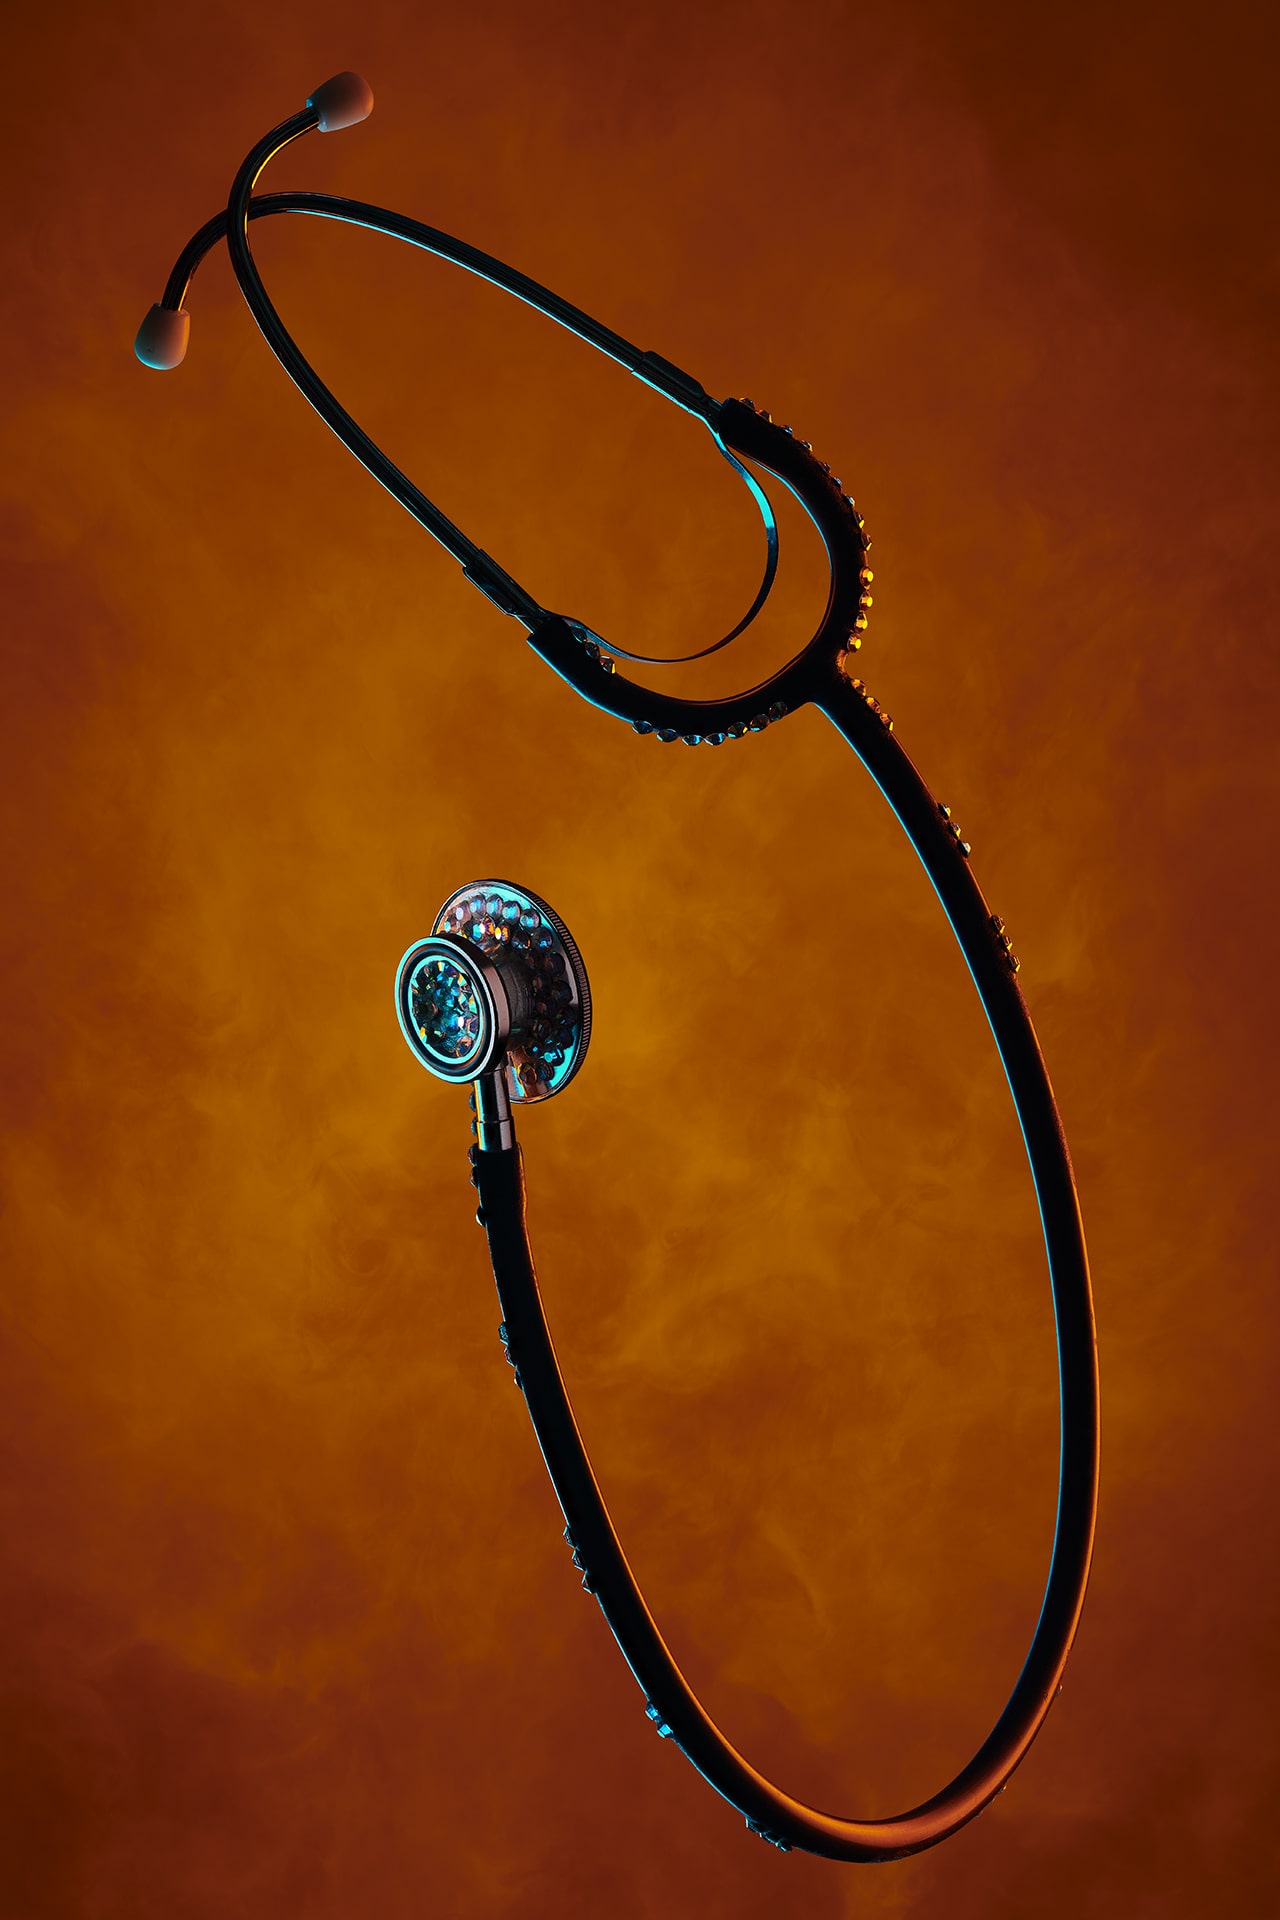 Stethoscope with jewelled features against smoky orange background